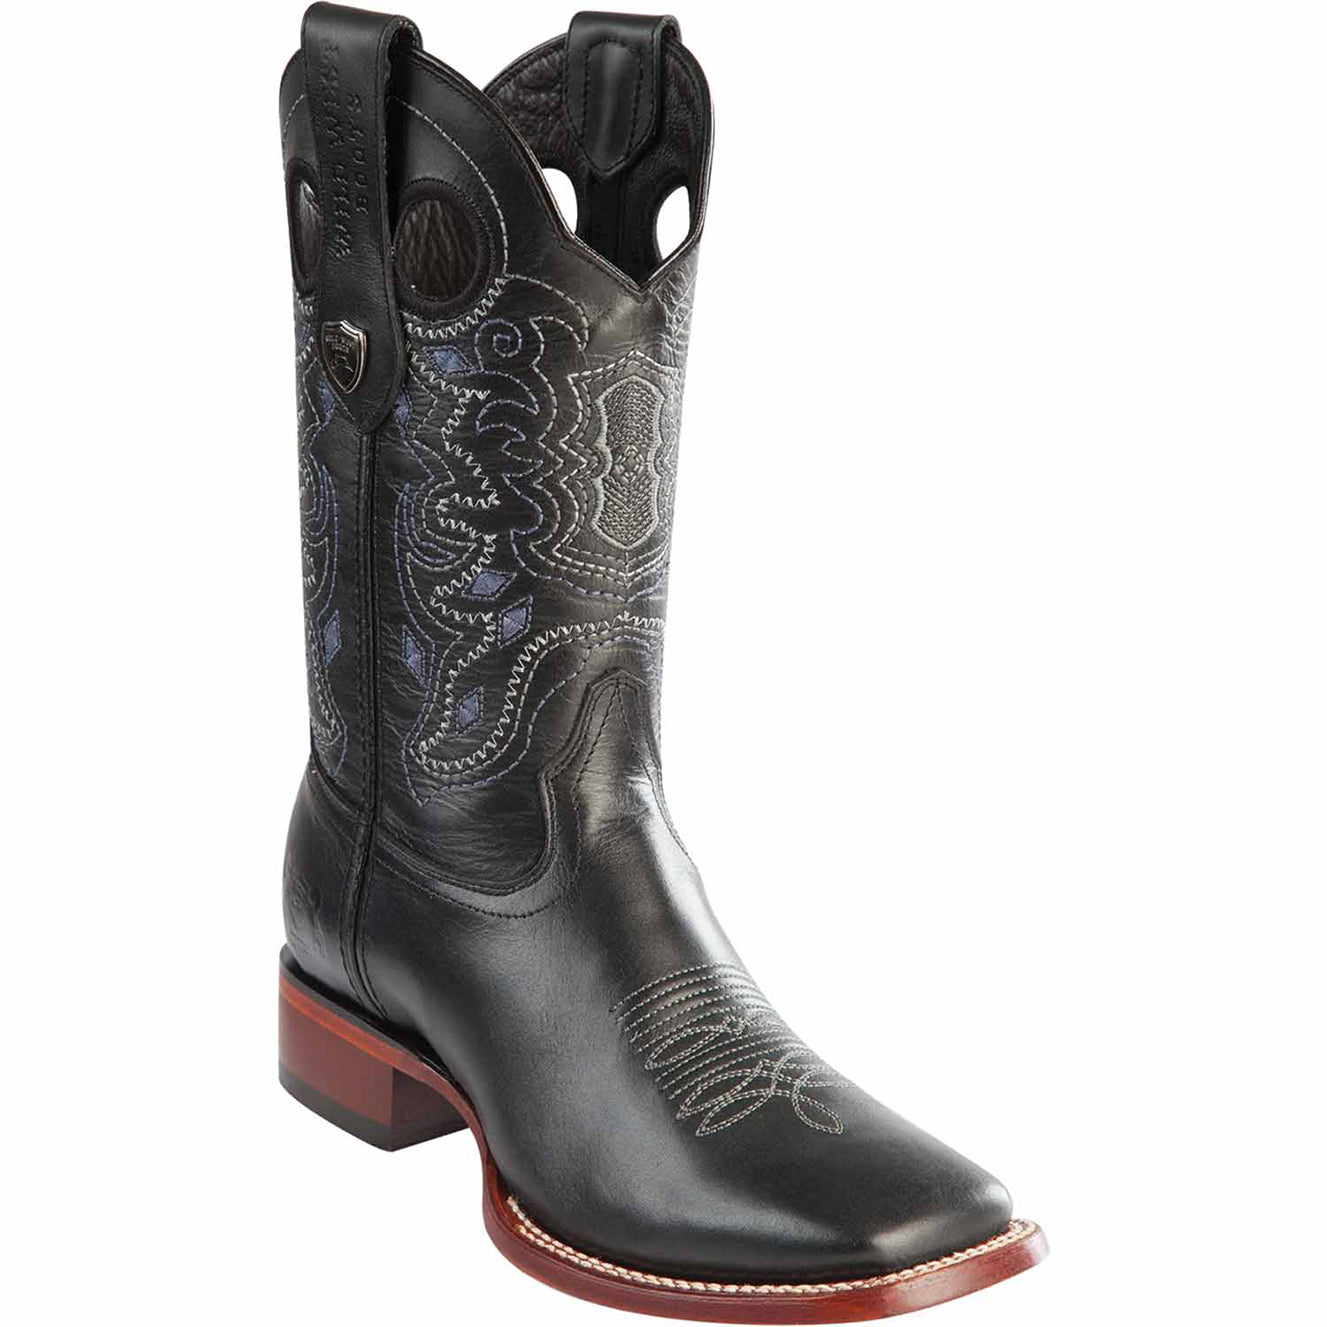 Mens Black Western Square Toe Boots - Wild West Boots